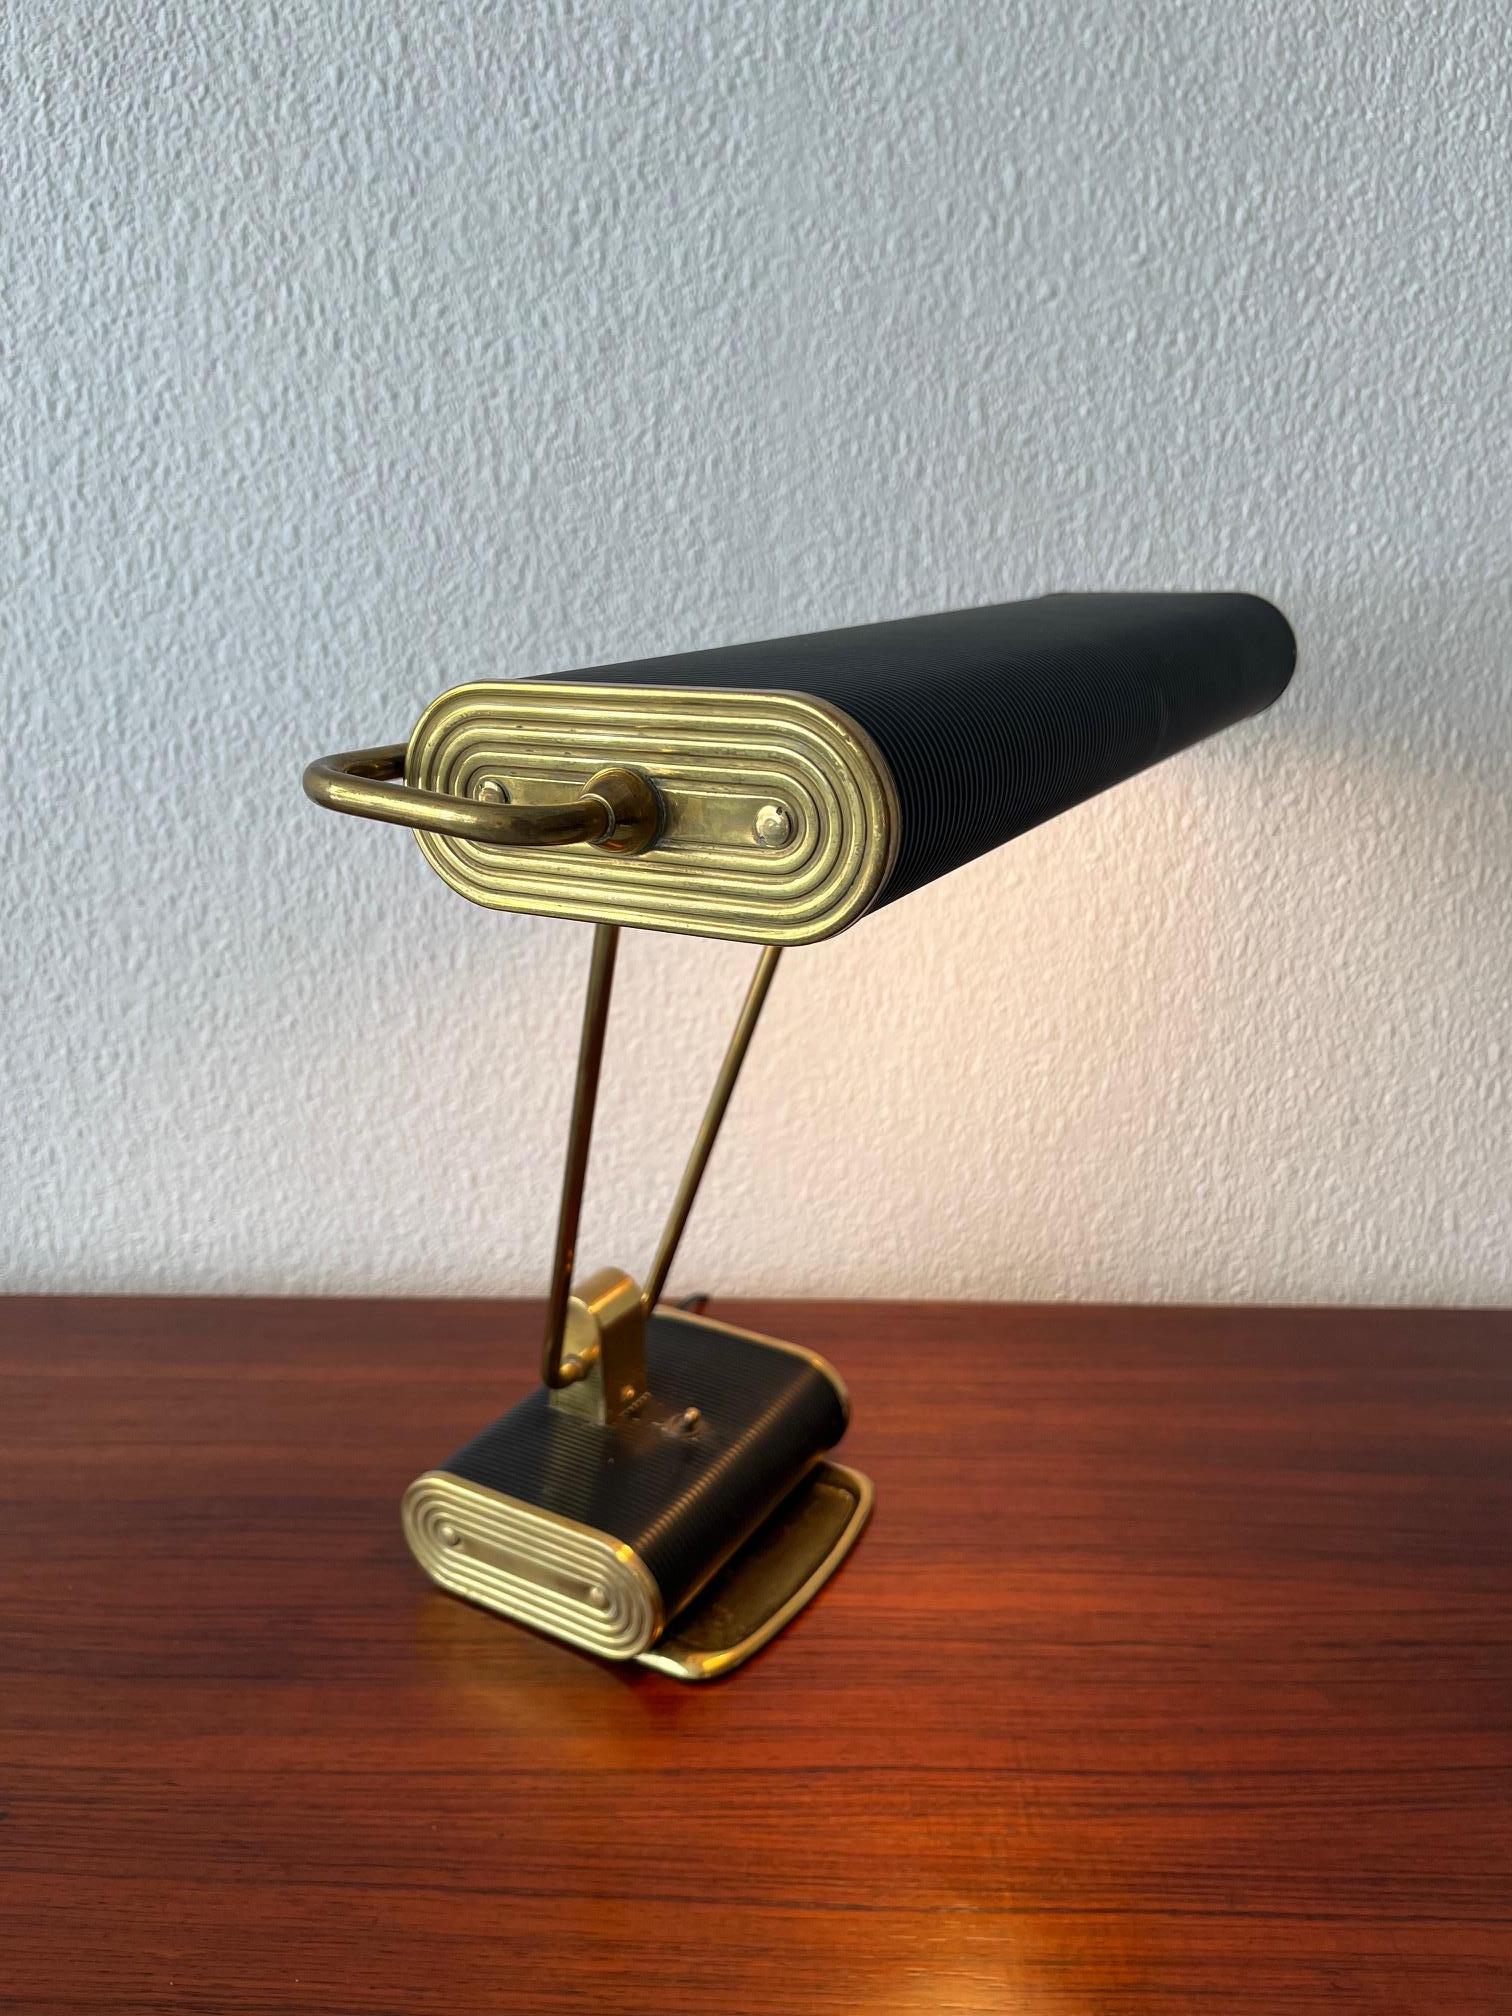 Brass & Aluminum Adjustable Desk Lamp by Eileen Gray for Jumo, France ca. 1940s In Good Condition For Sale In Geneva, CH